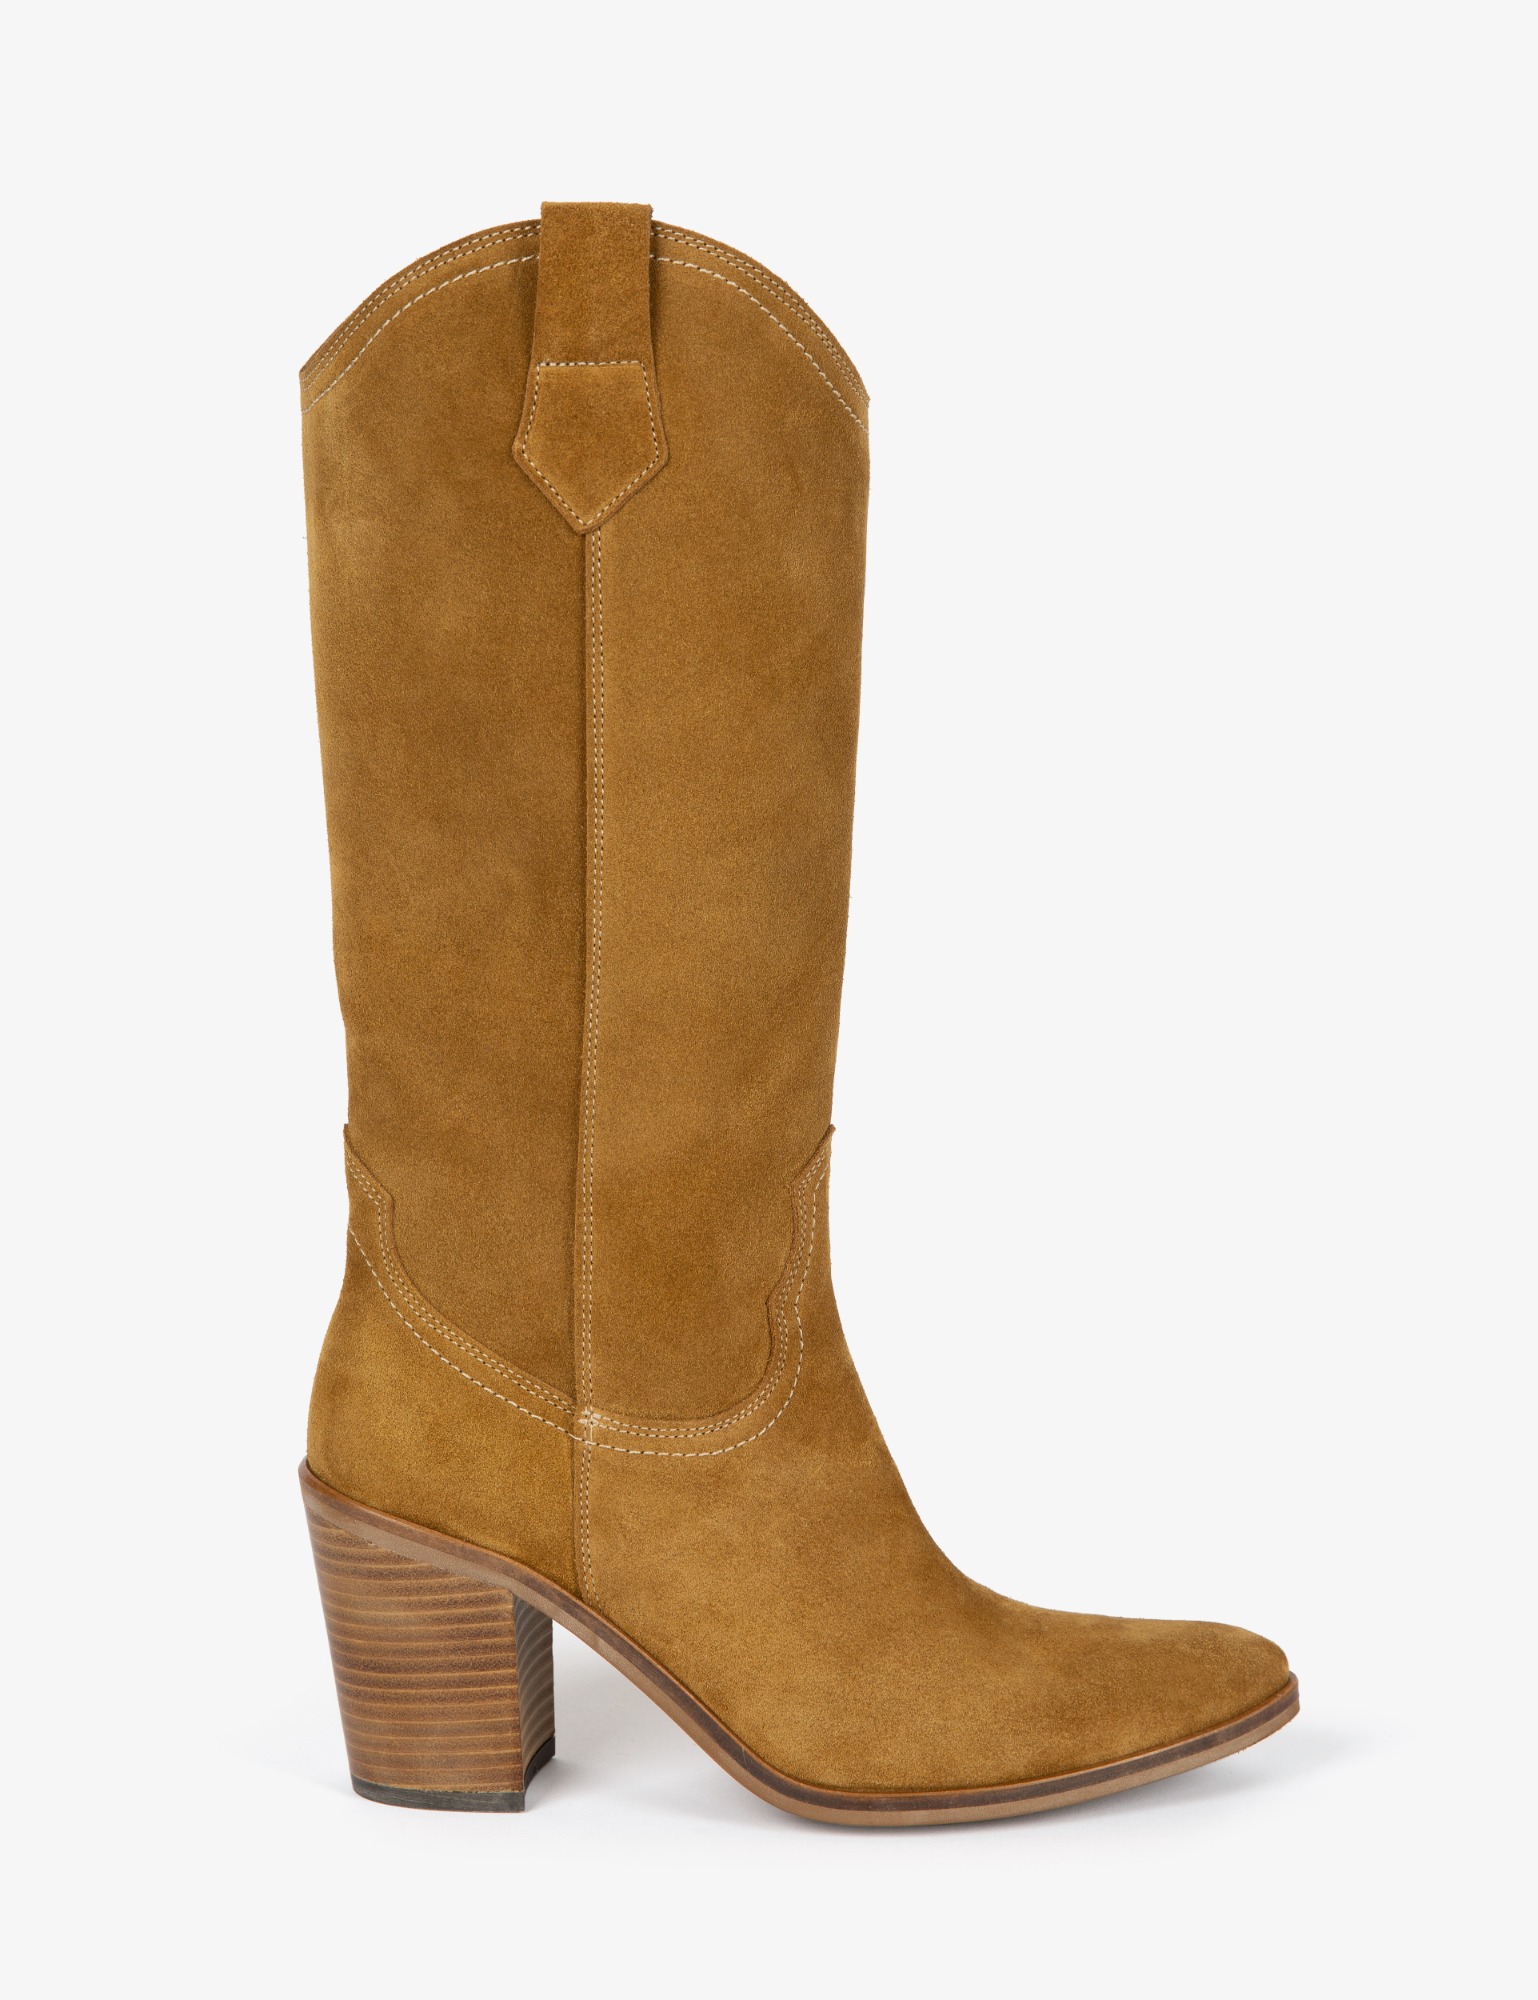 Midcalf Robyn Suede Boot